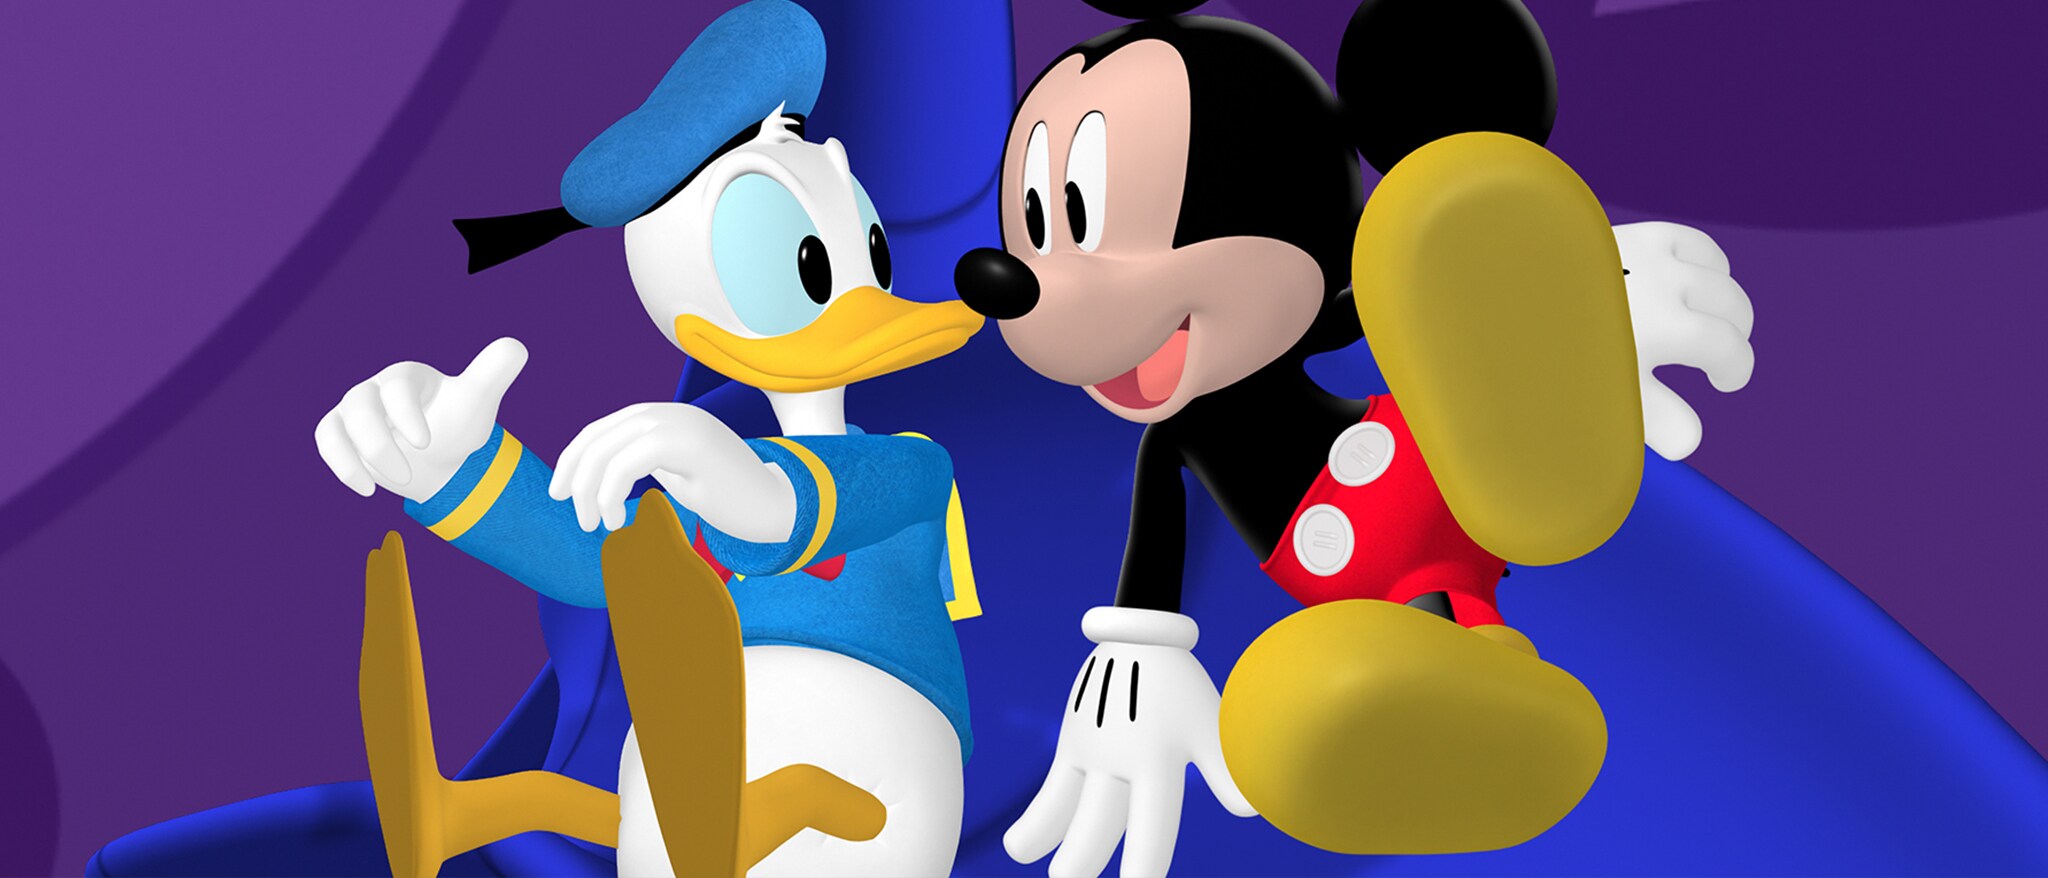 Mickey Mouse Clubhouse - Disney Channel Series - Where To Watch